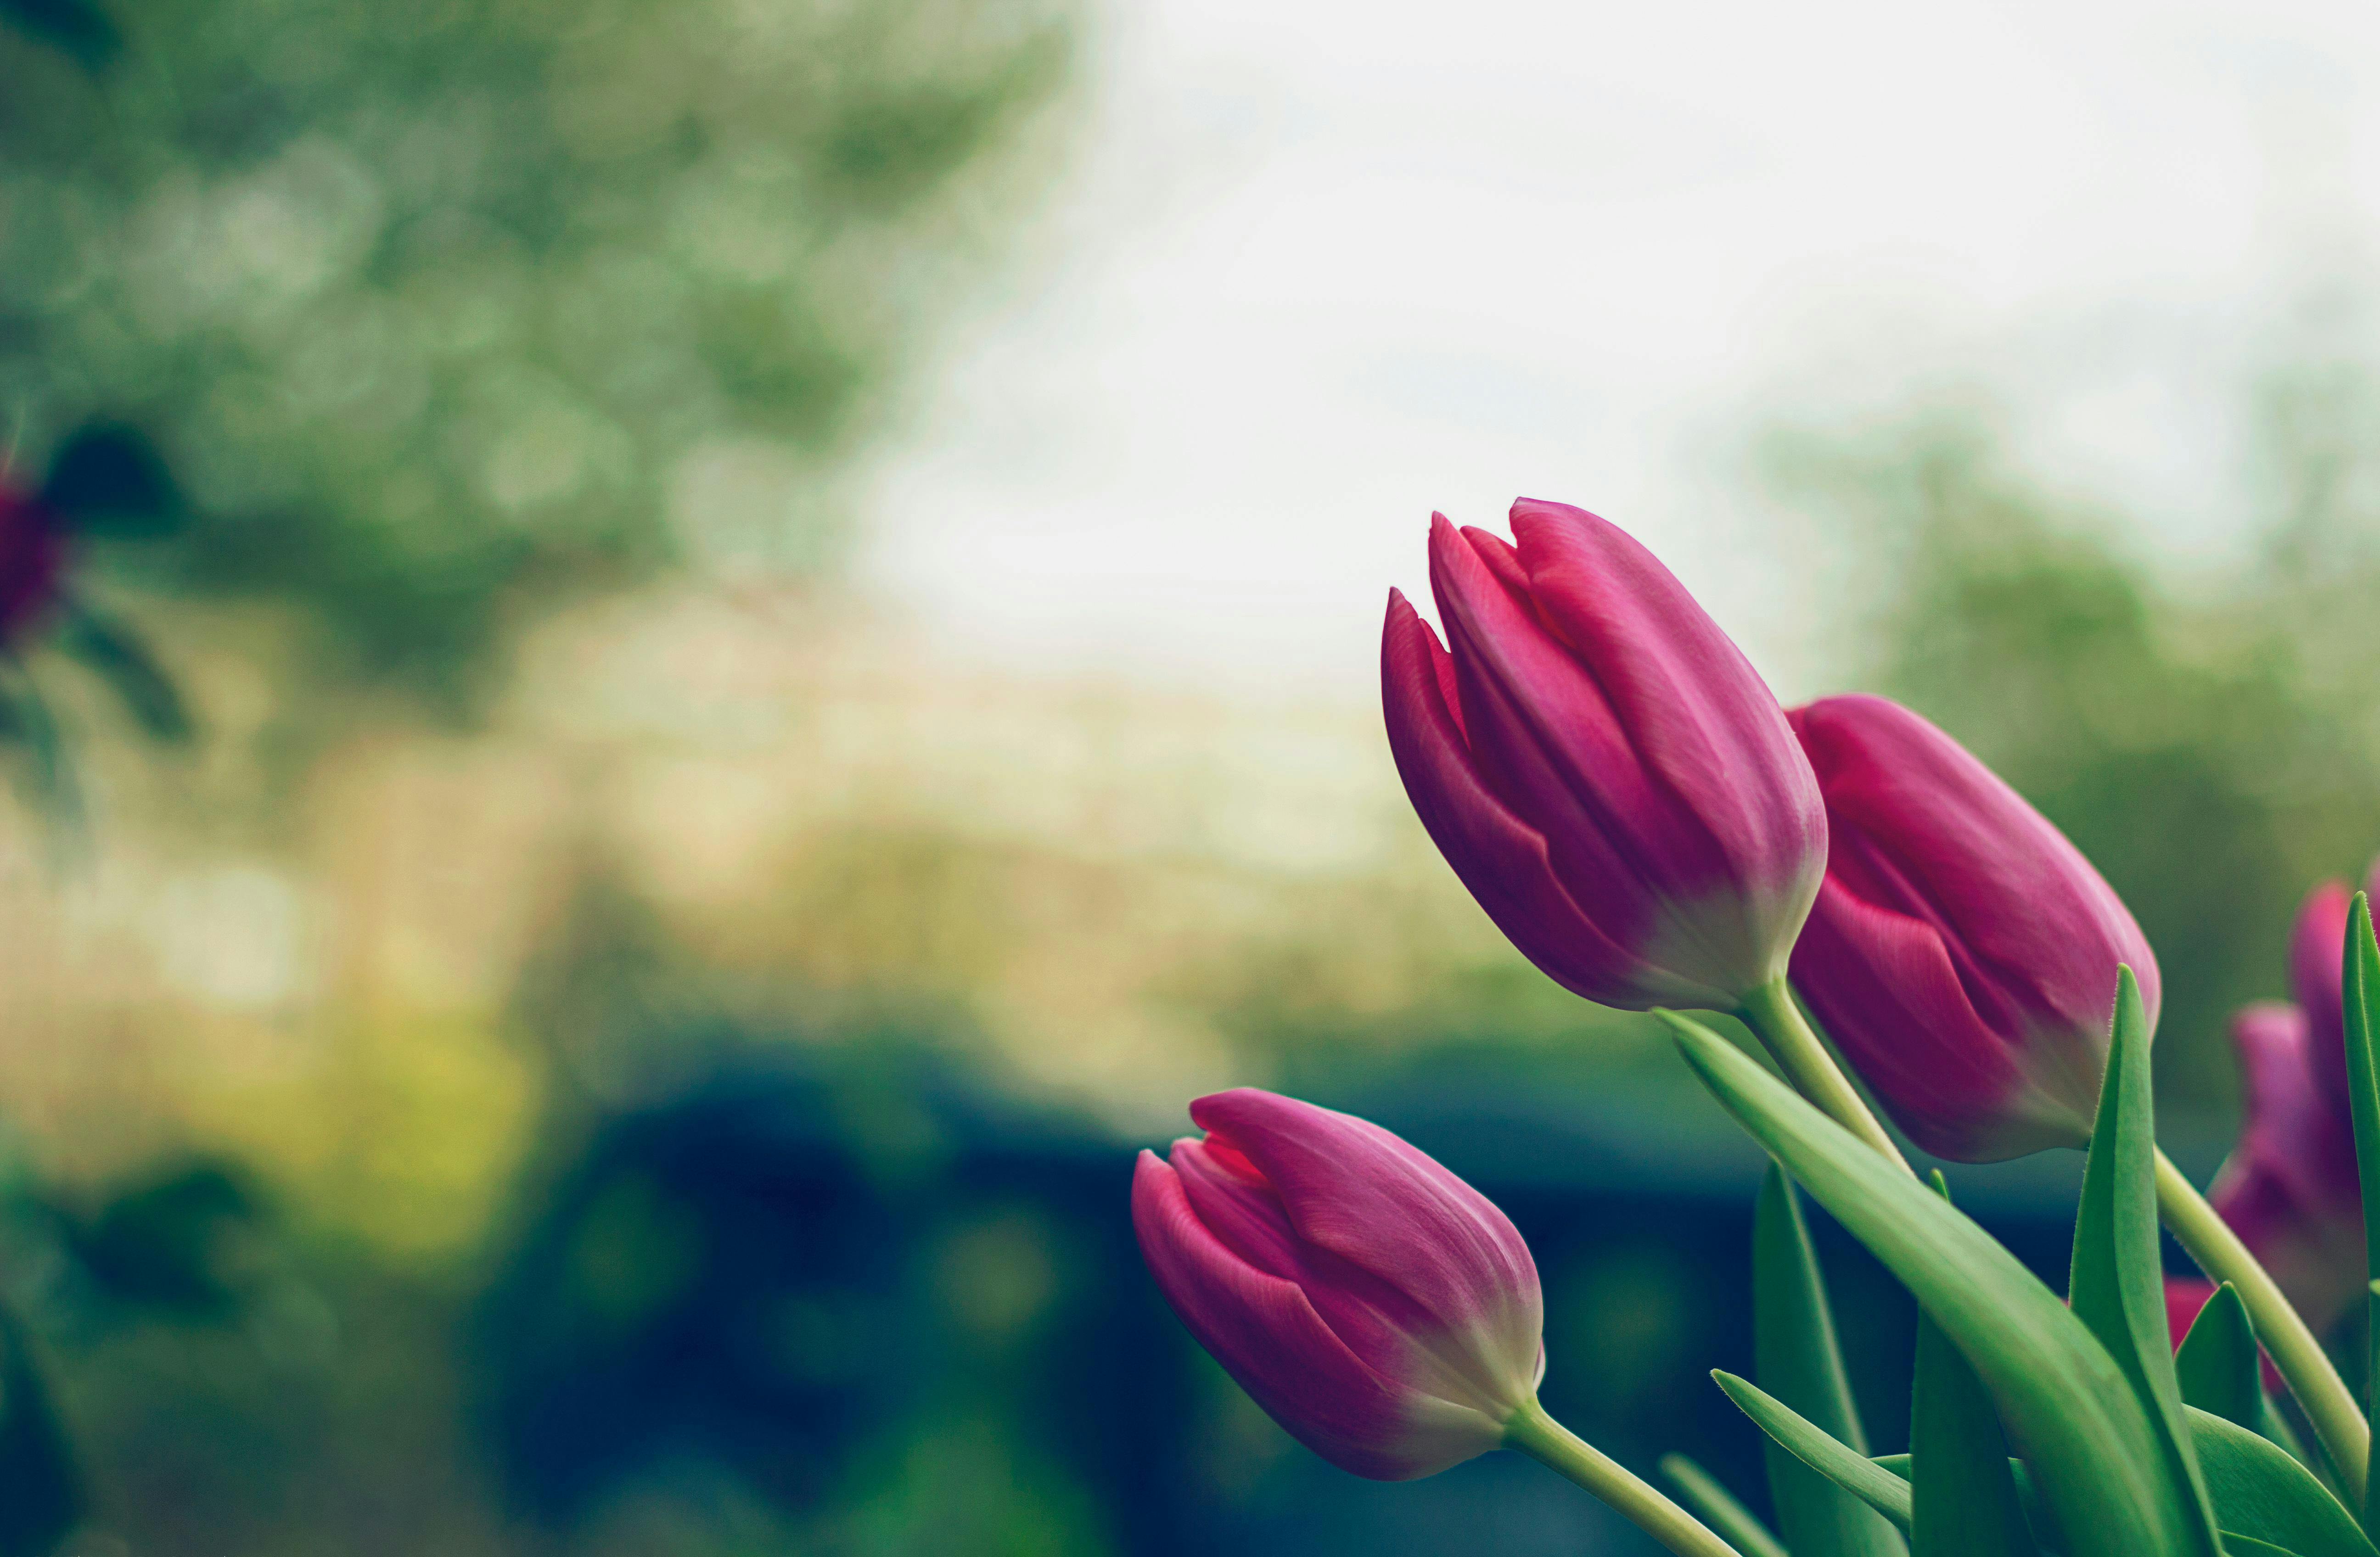 Daily Wallpaper: Tulips in Netherlands | I Like To Waste My Time